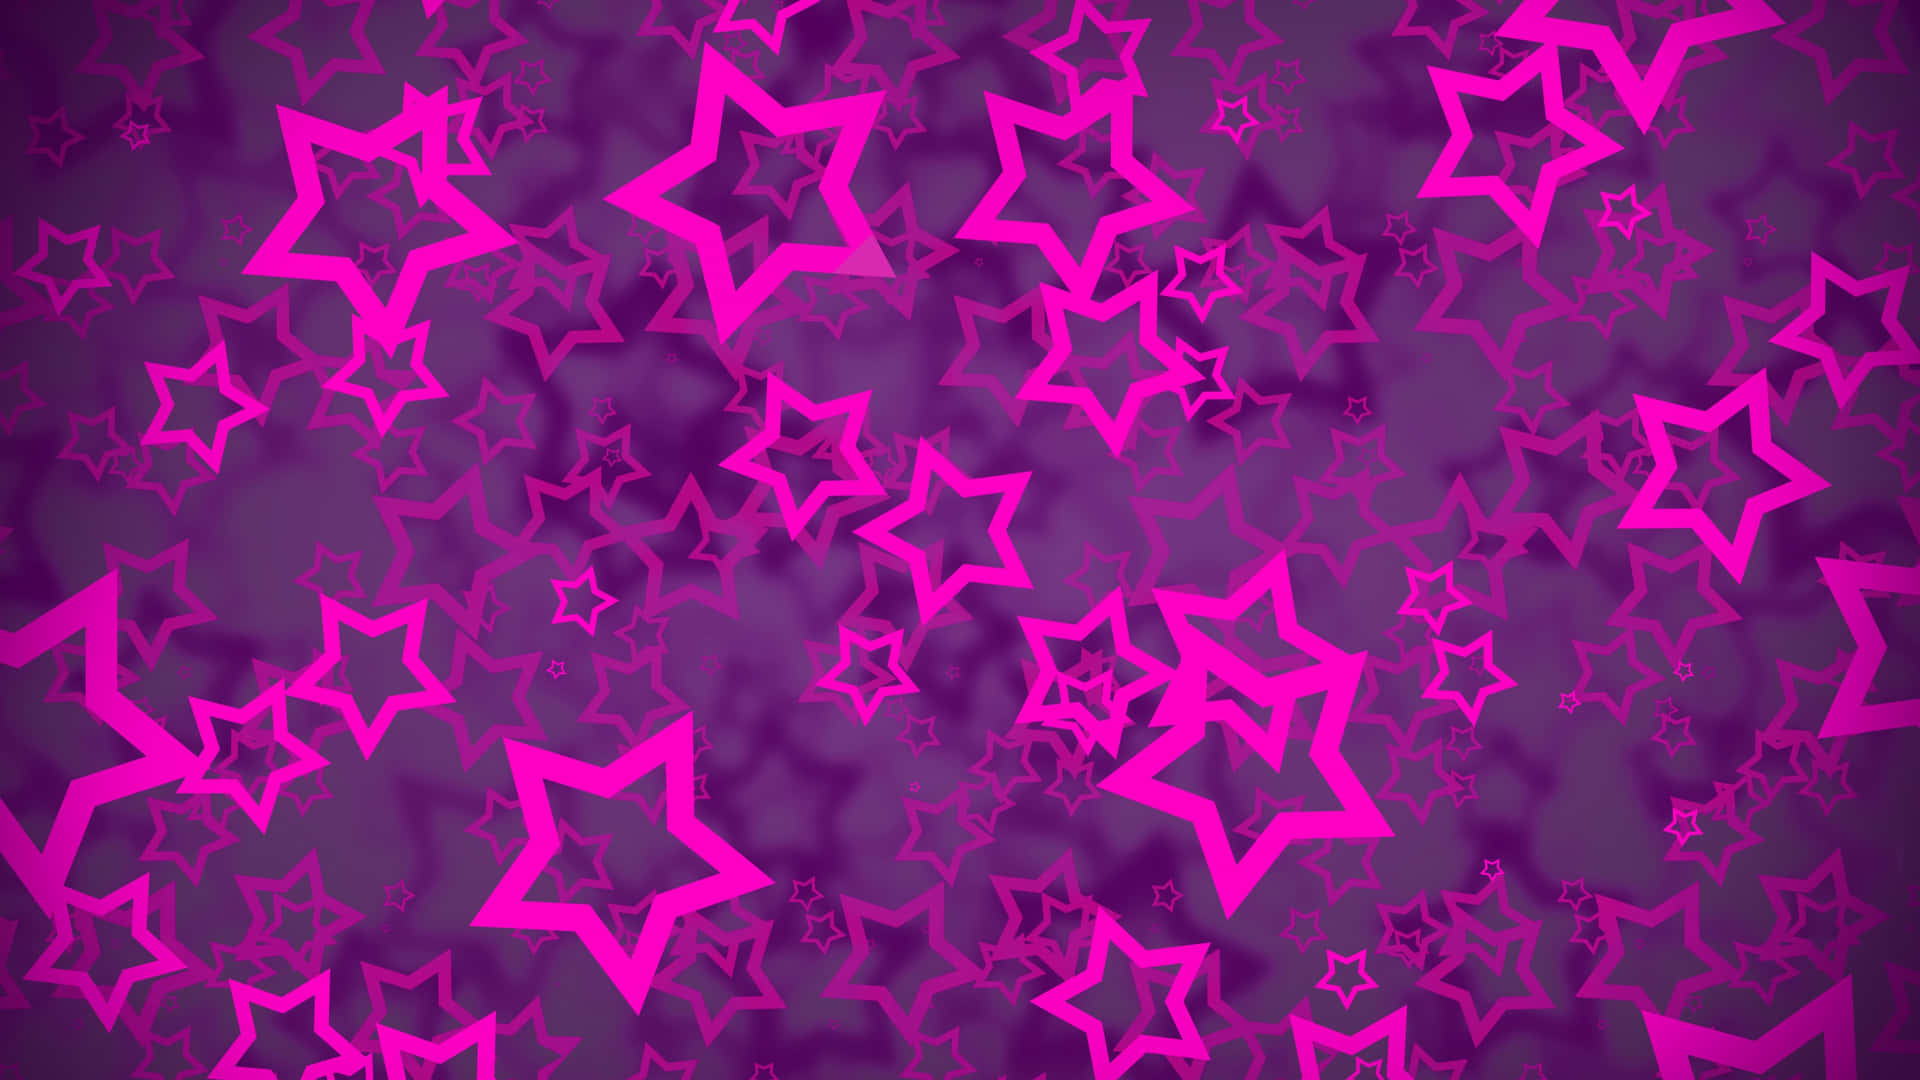 Image  A Fun and Colorful Background Featuring a Pink Star